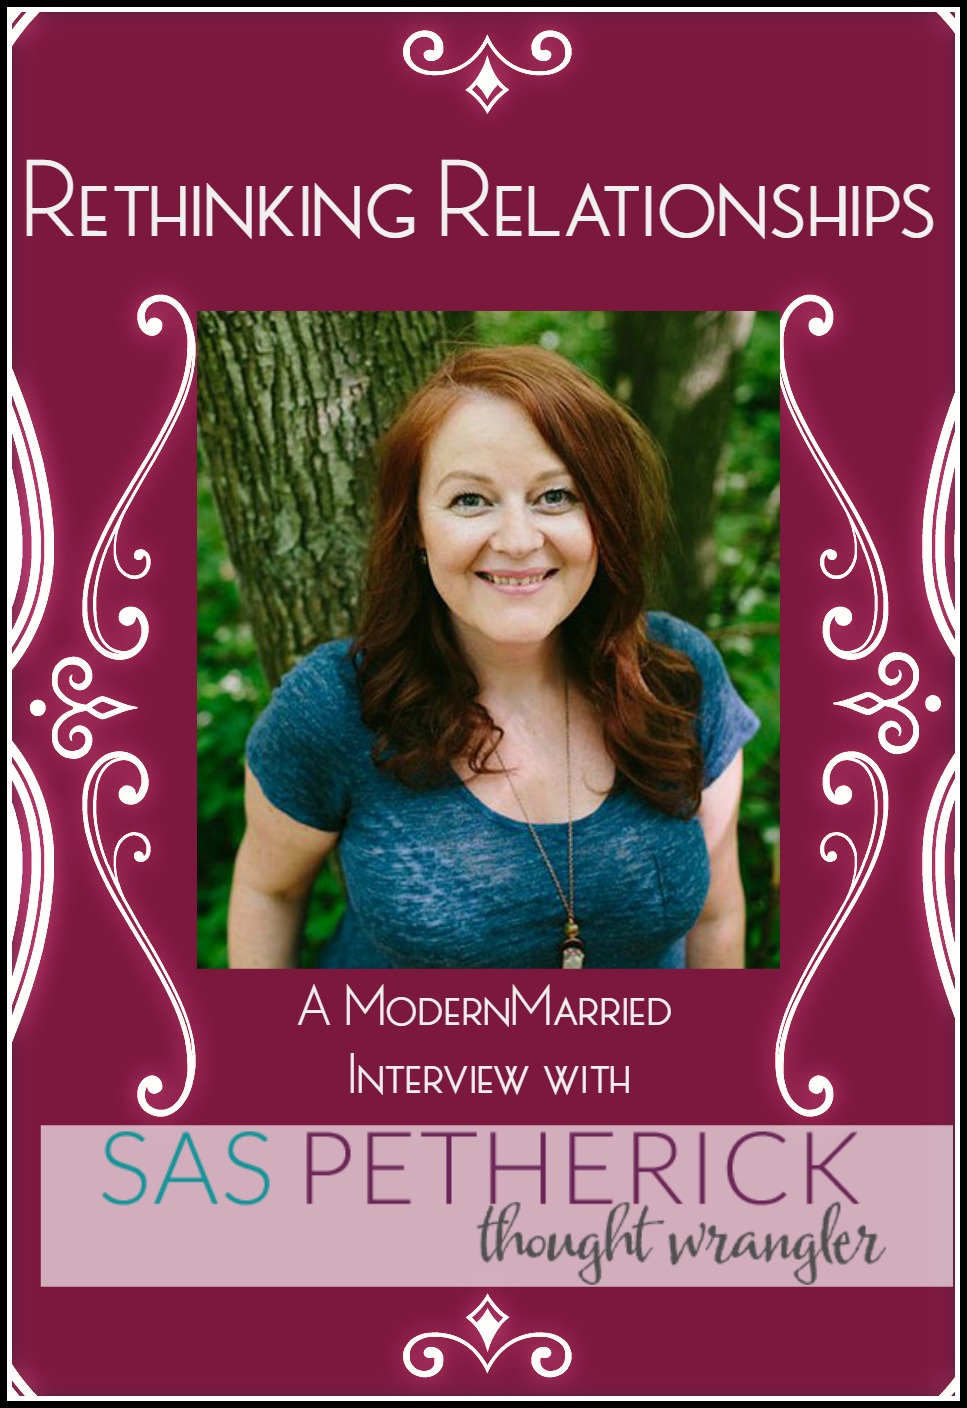 #Rethinking Relationships – A @ModernMarried Interview with @SasPetherick